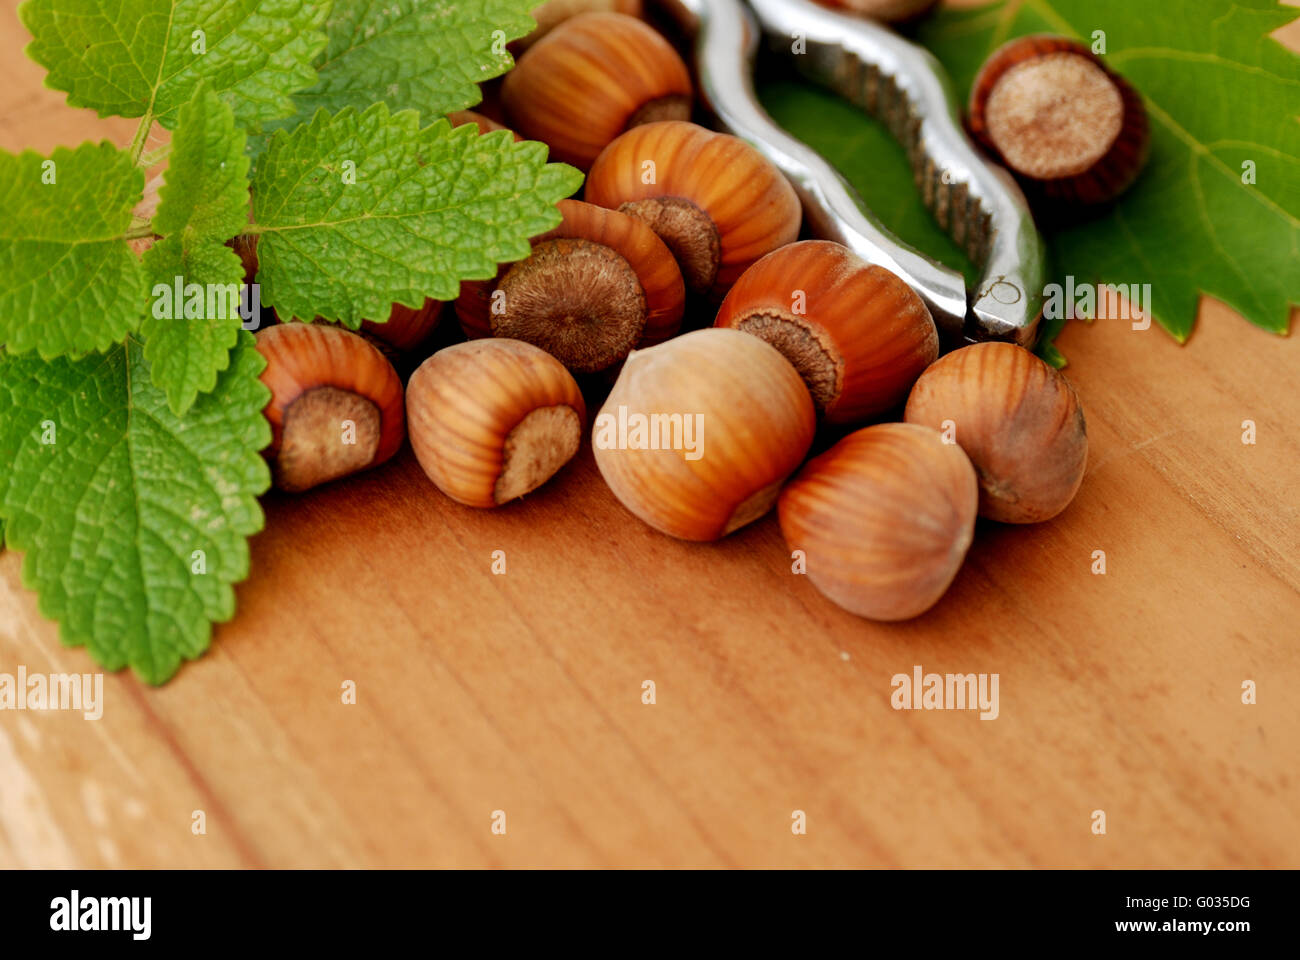 Hazelnuts with pincers 3 Stock Photo